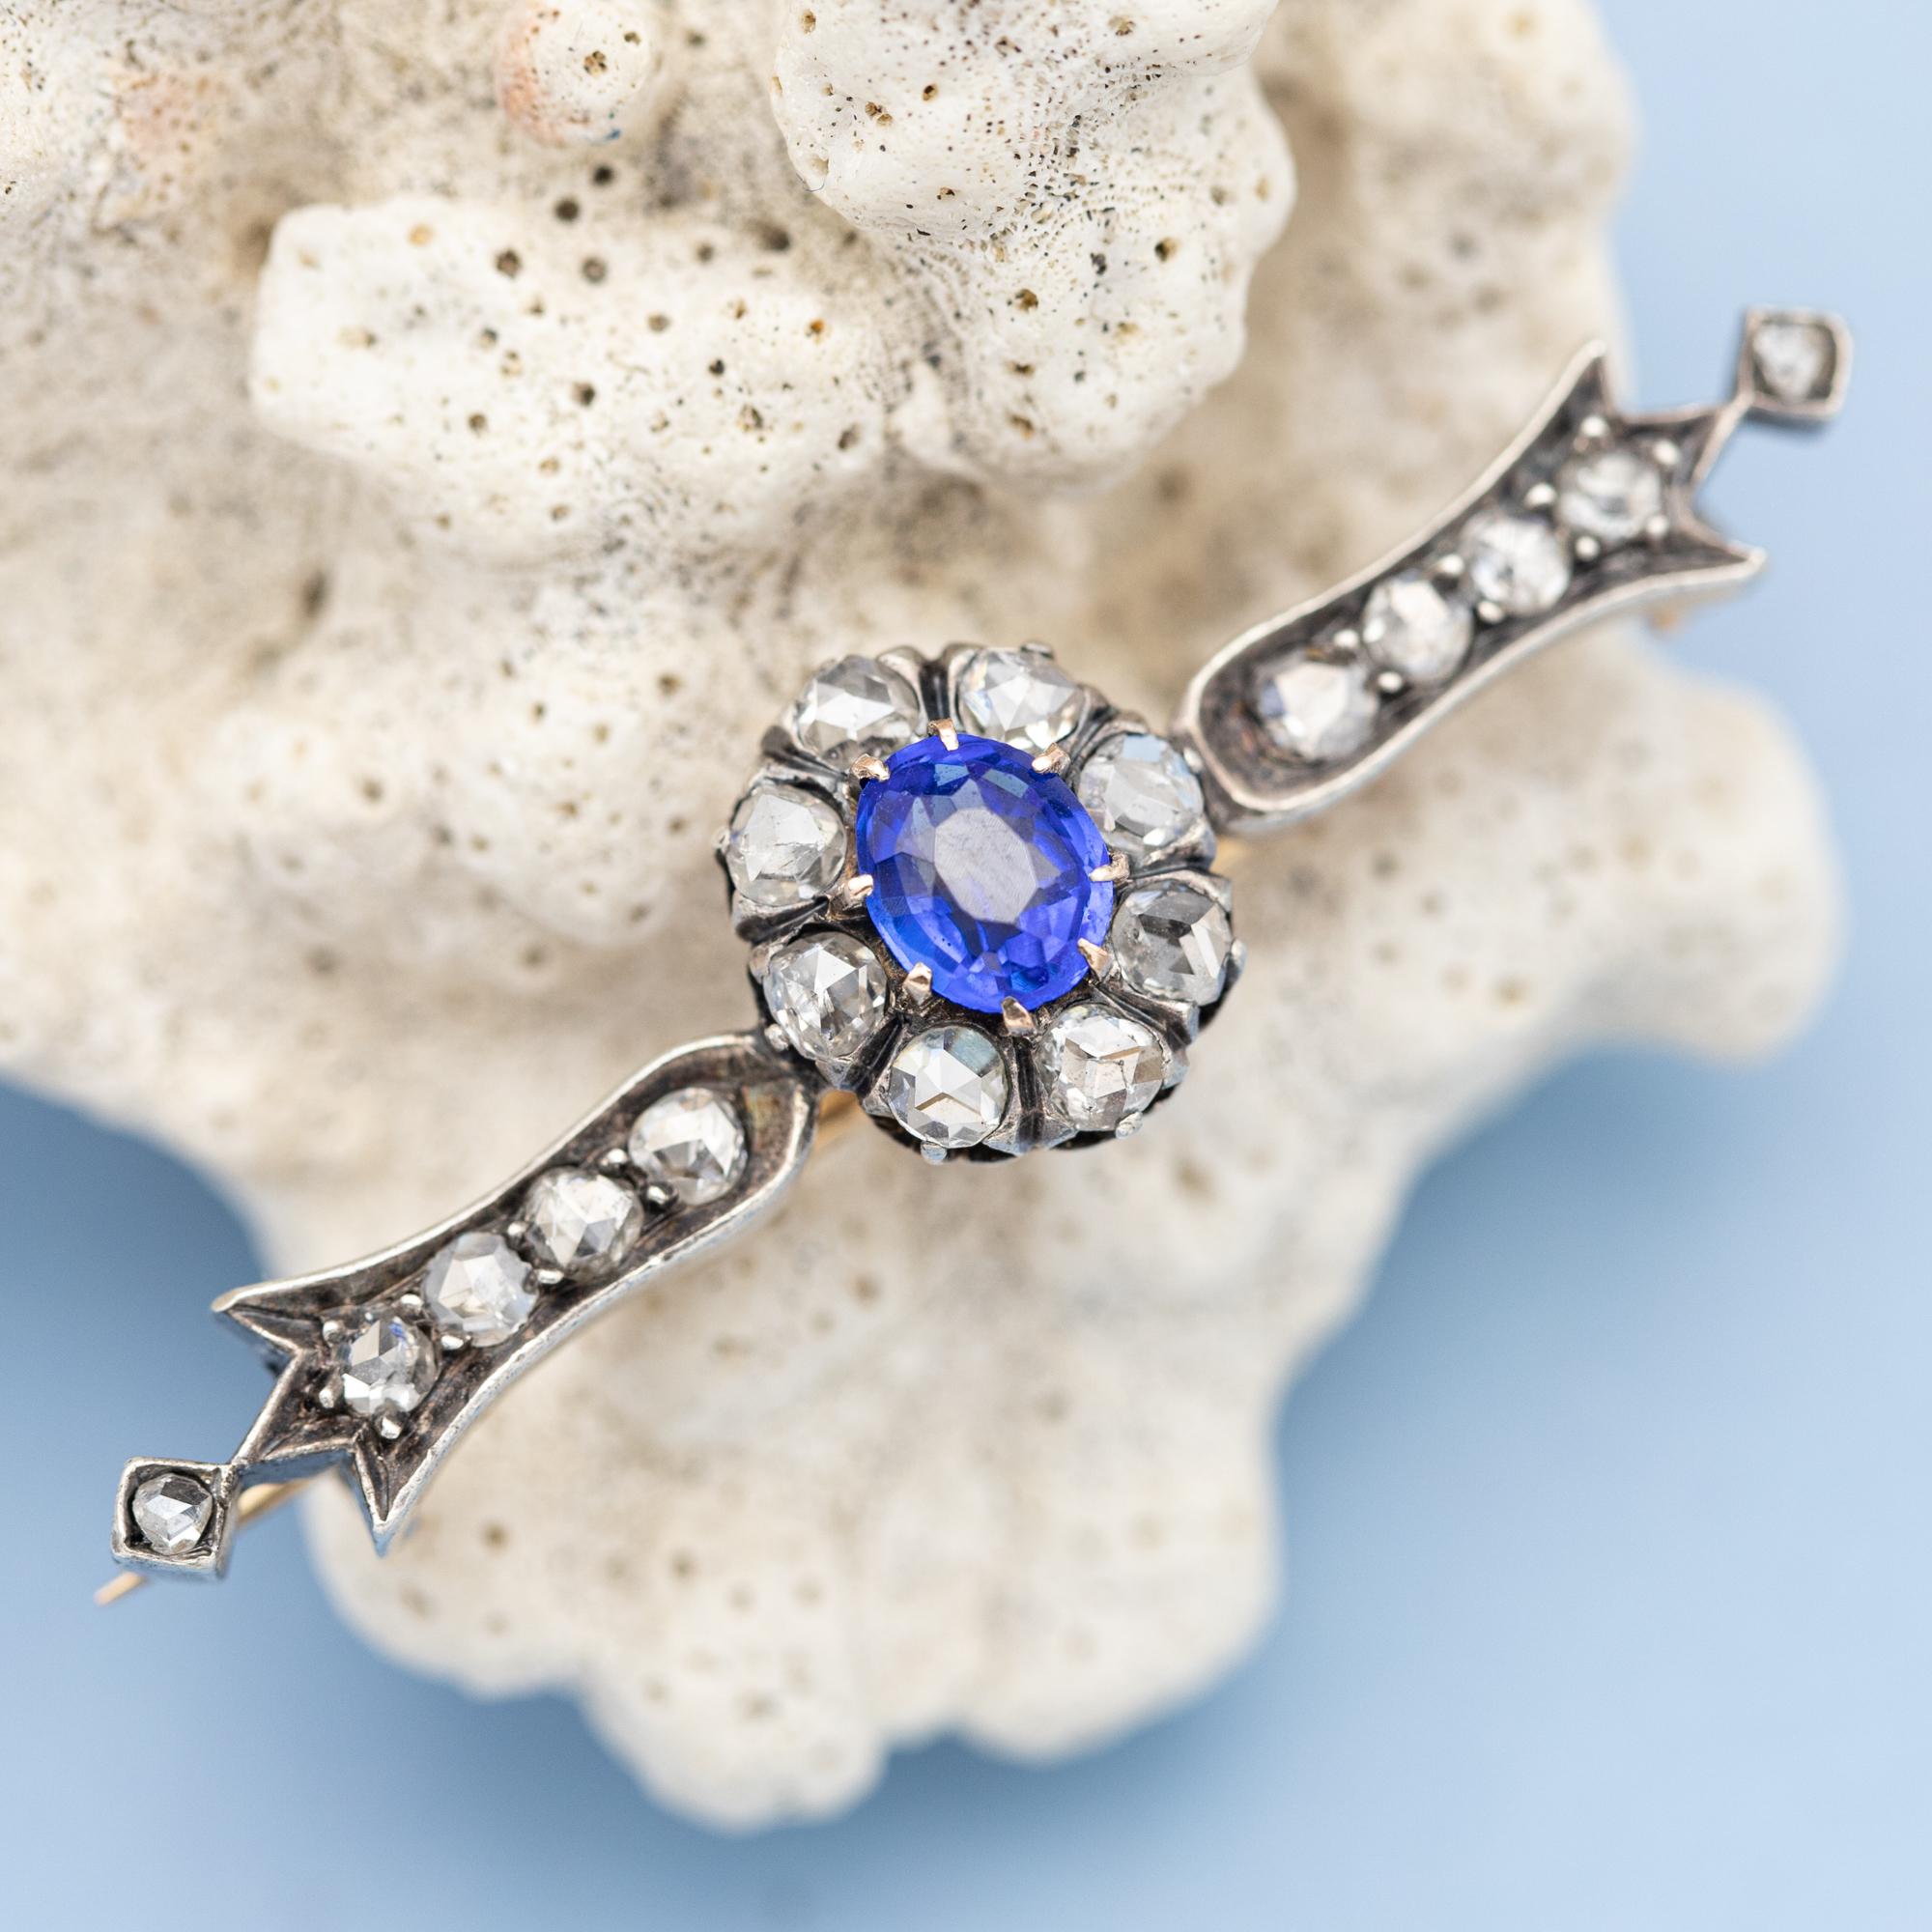 For sale is this Marvellous 18 K gold and silver Victorian brooch. This piece was crafted during the 19th century in France and is therefor also called a Napoleon III jewel. This stunning floral themed bar brooch is set with a bright blue sapphire,